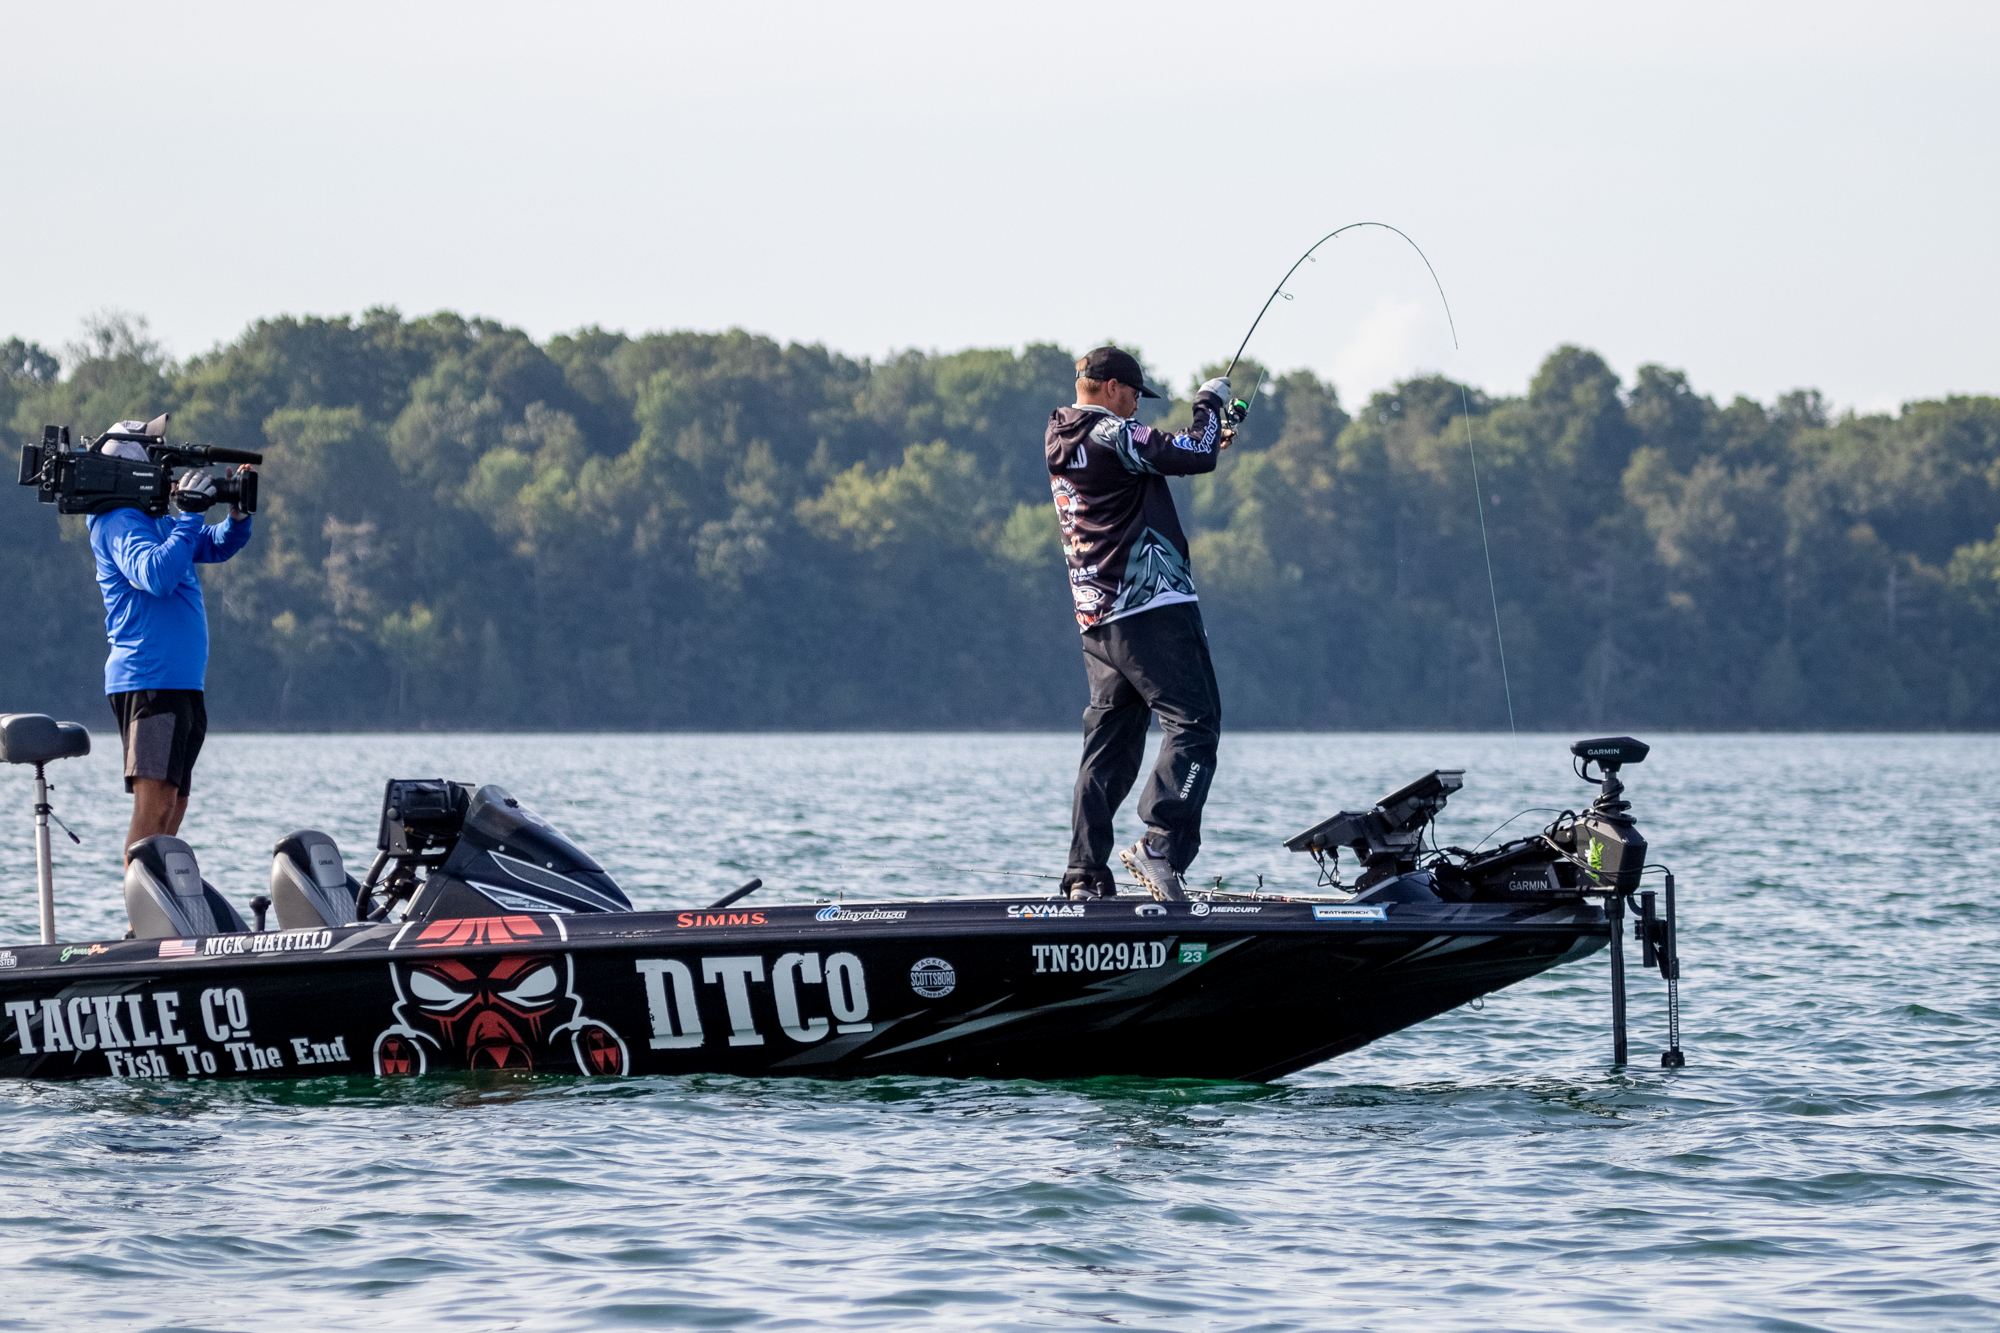 Mitchell Tops 100 Pounds on Day 1 - Major League Fishing